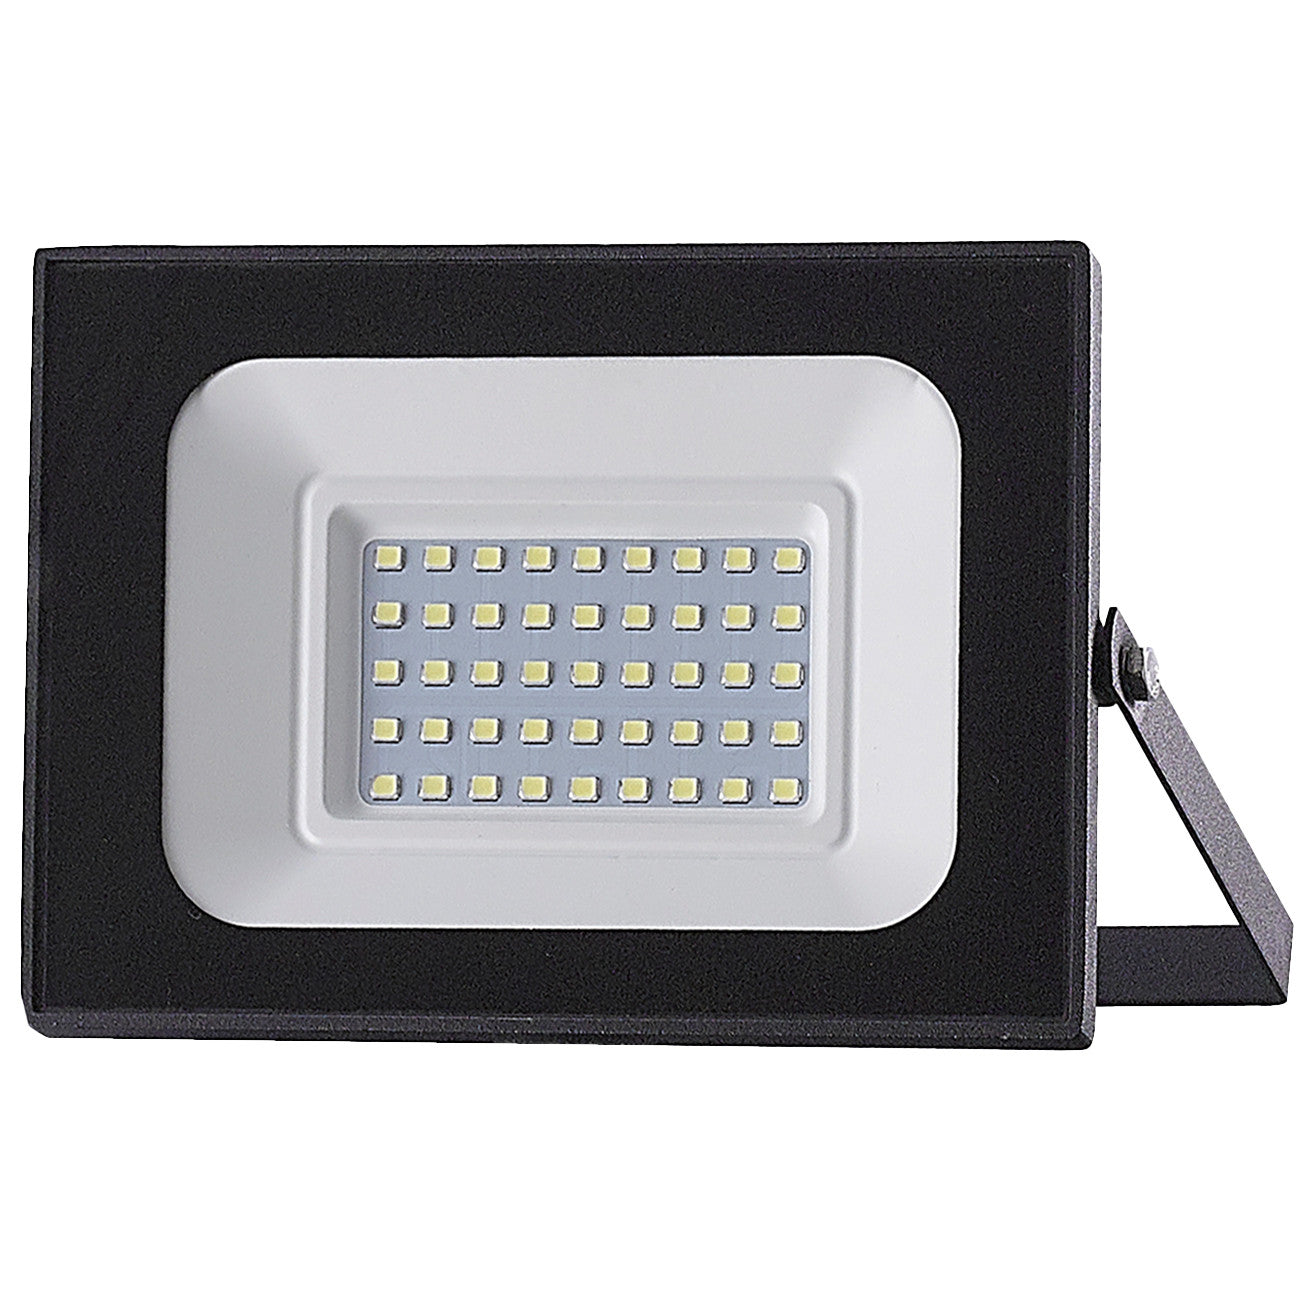 Proiettore led-smd  30w 4000k naturale 2400lm